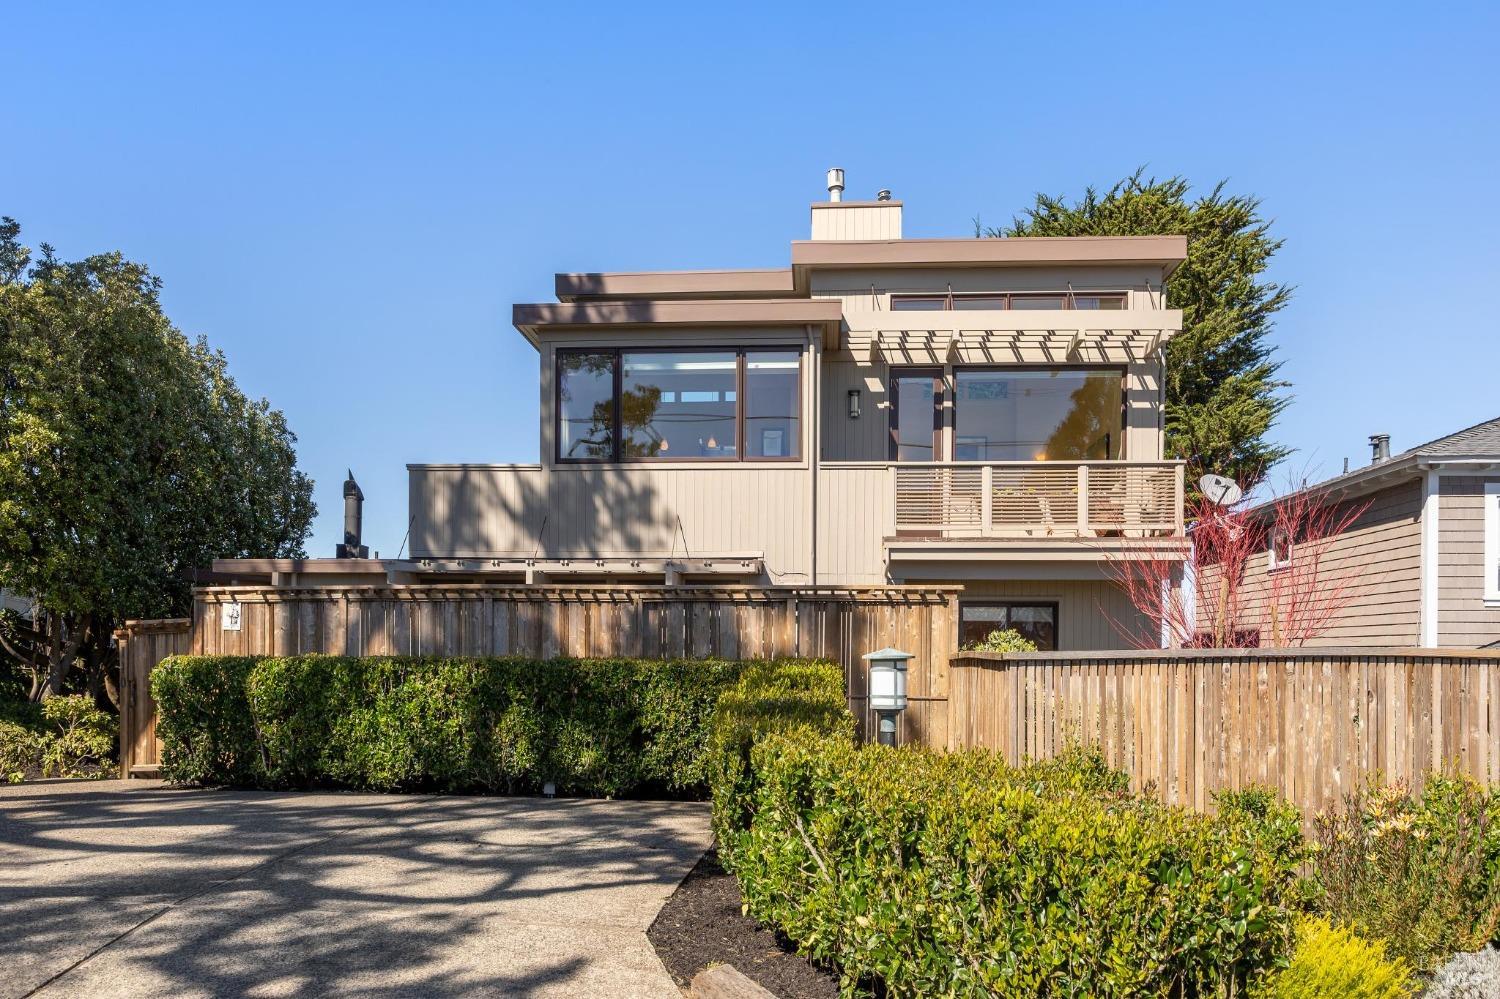 Photo of 110 Cloud View Rd in Sausalito, CA